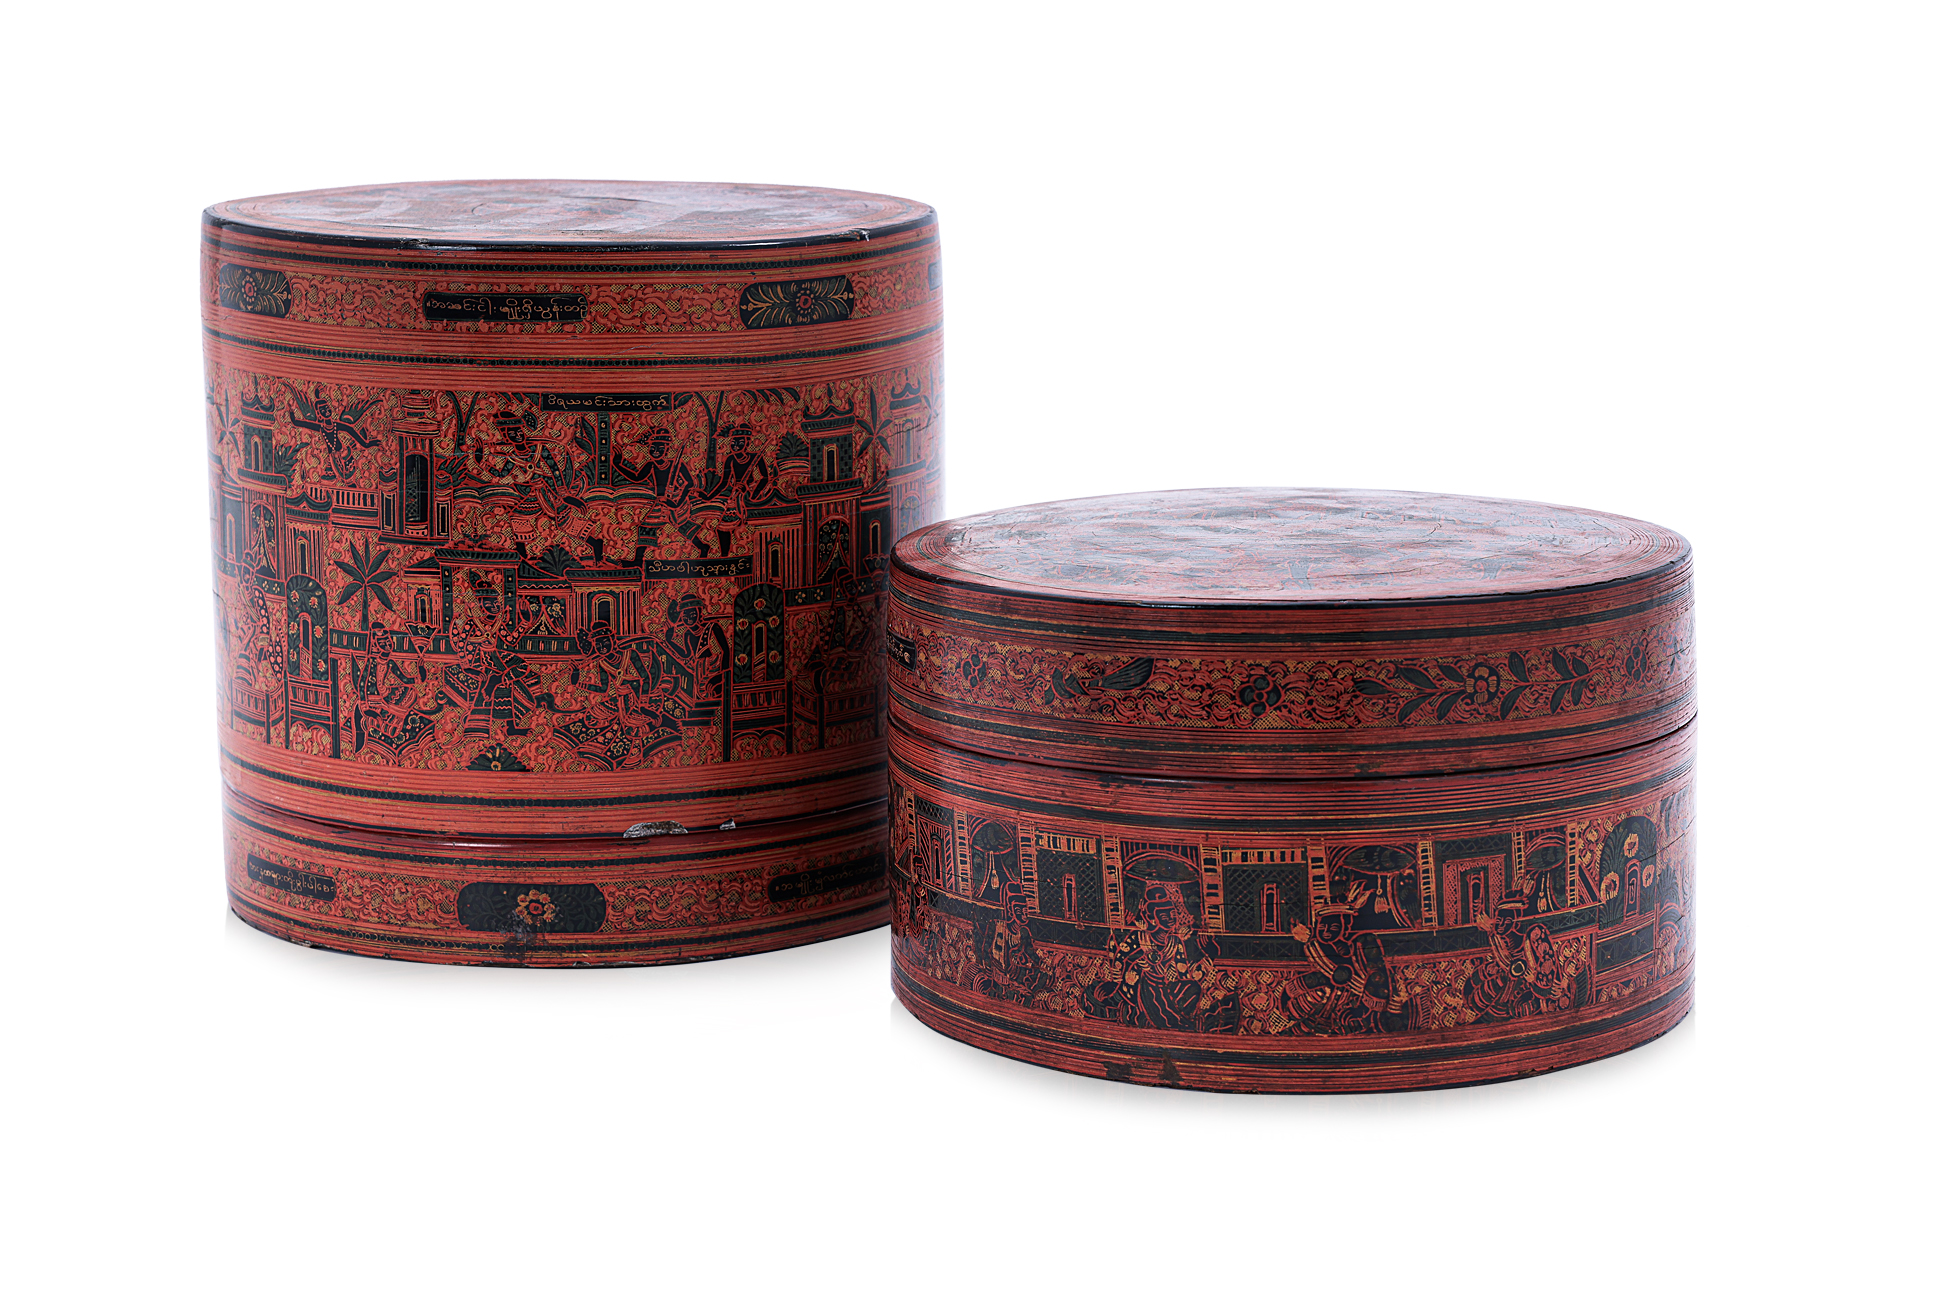 TWO SIMILAR BURMESE LACQUER CYLINDRICAL BETEL BOXES